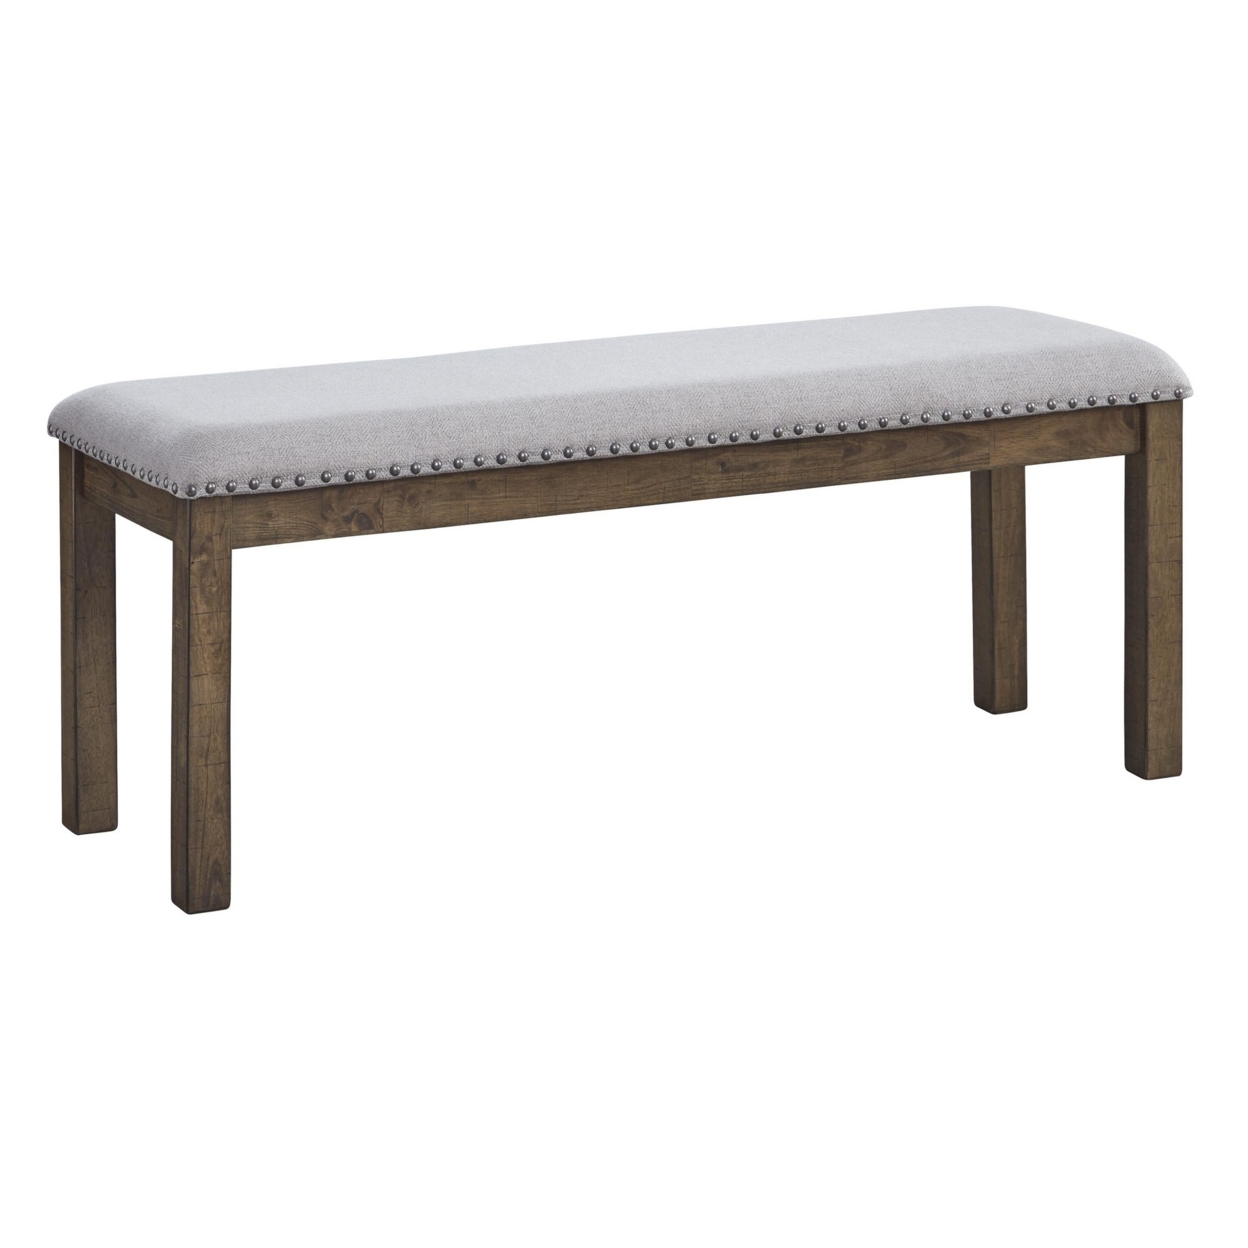 Nailhead Trim Wooden Dining Bench With Fabric Upholstery, Brown And Gray- Saltoro Sherpi